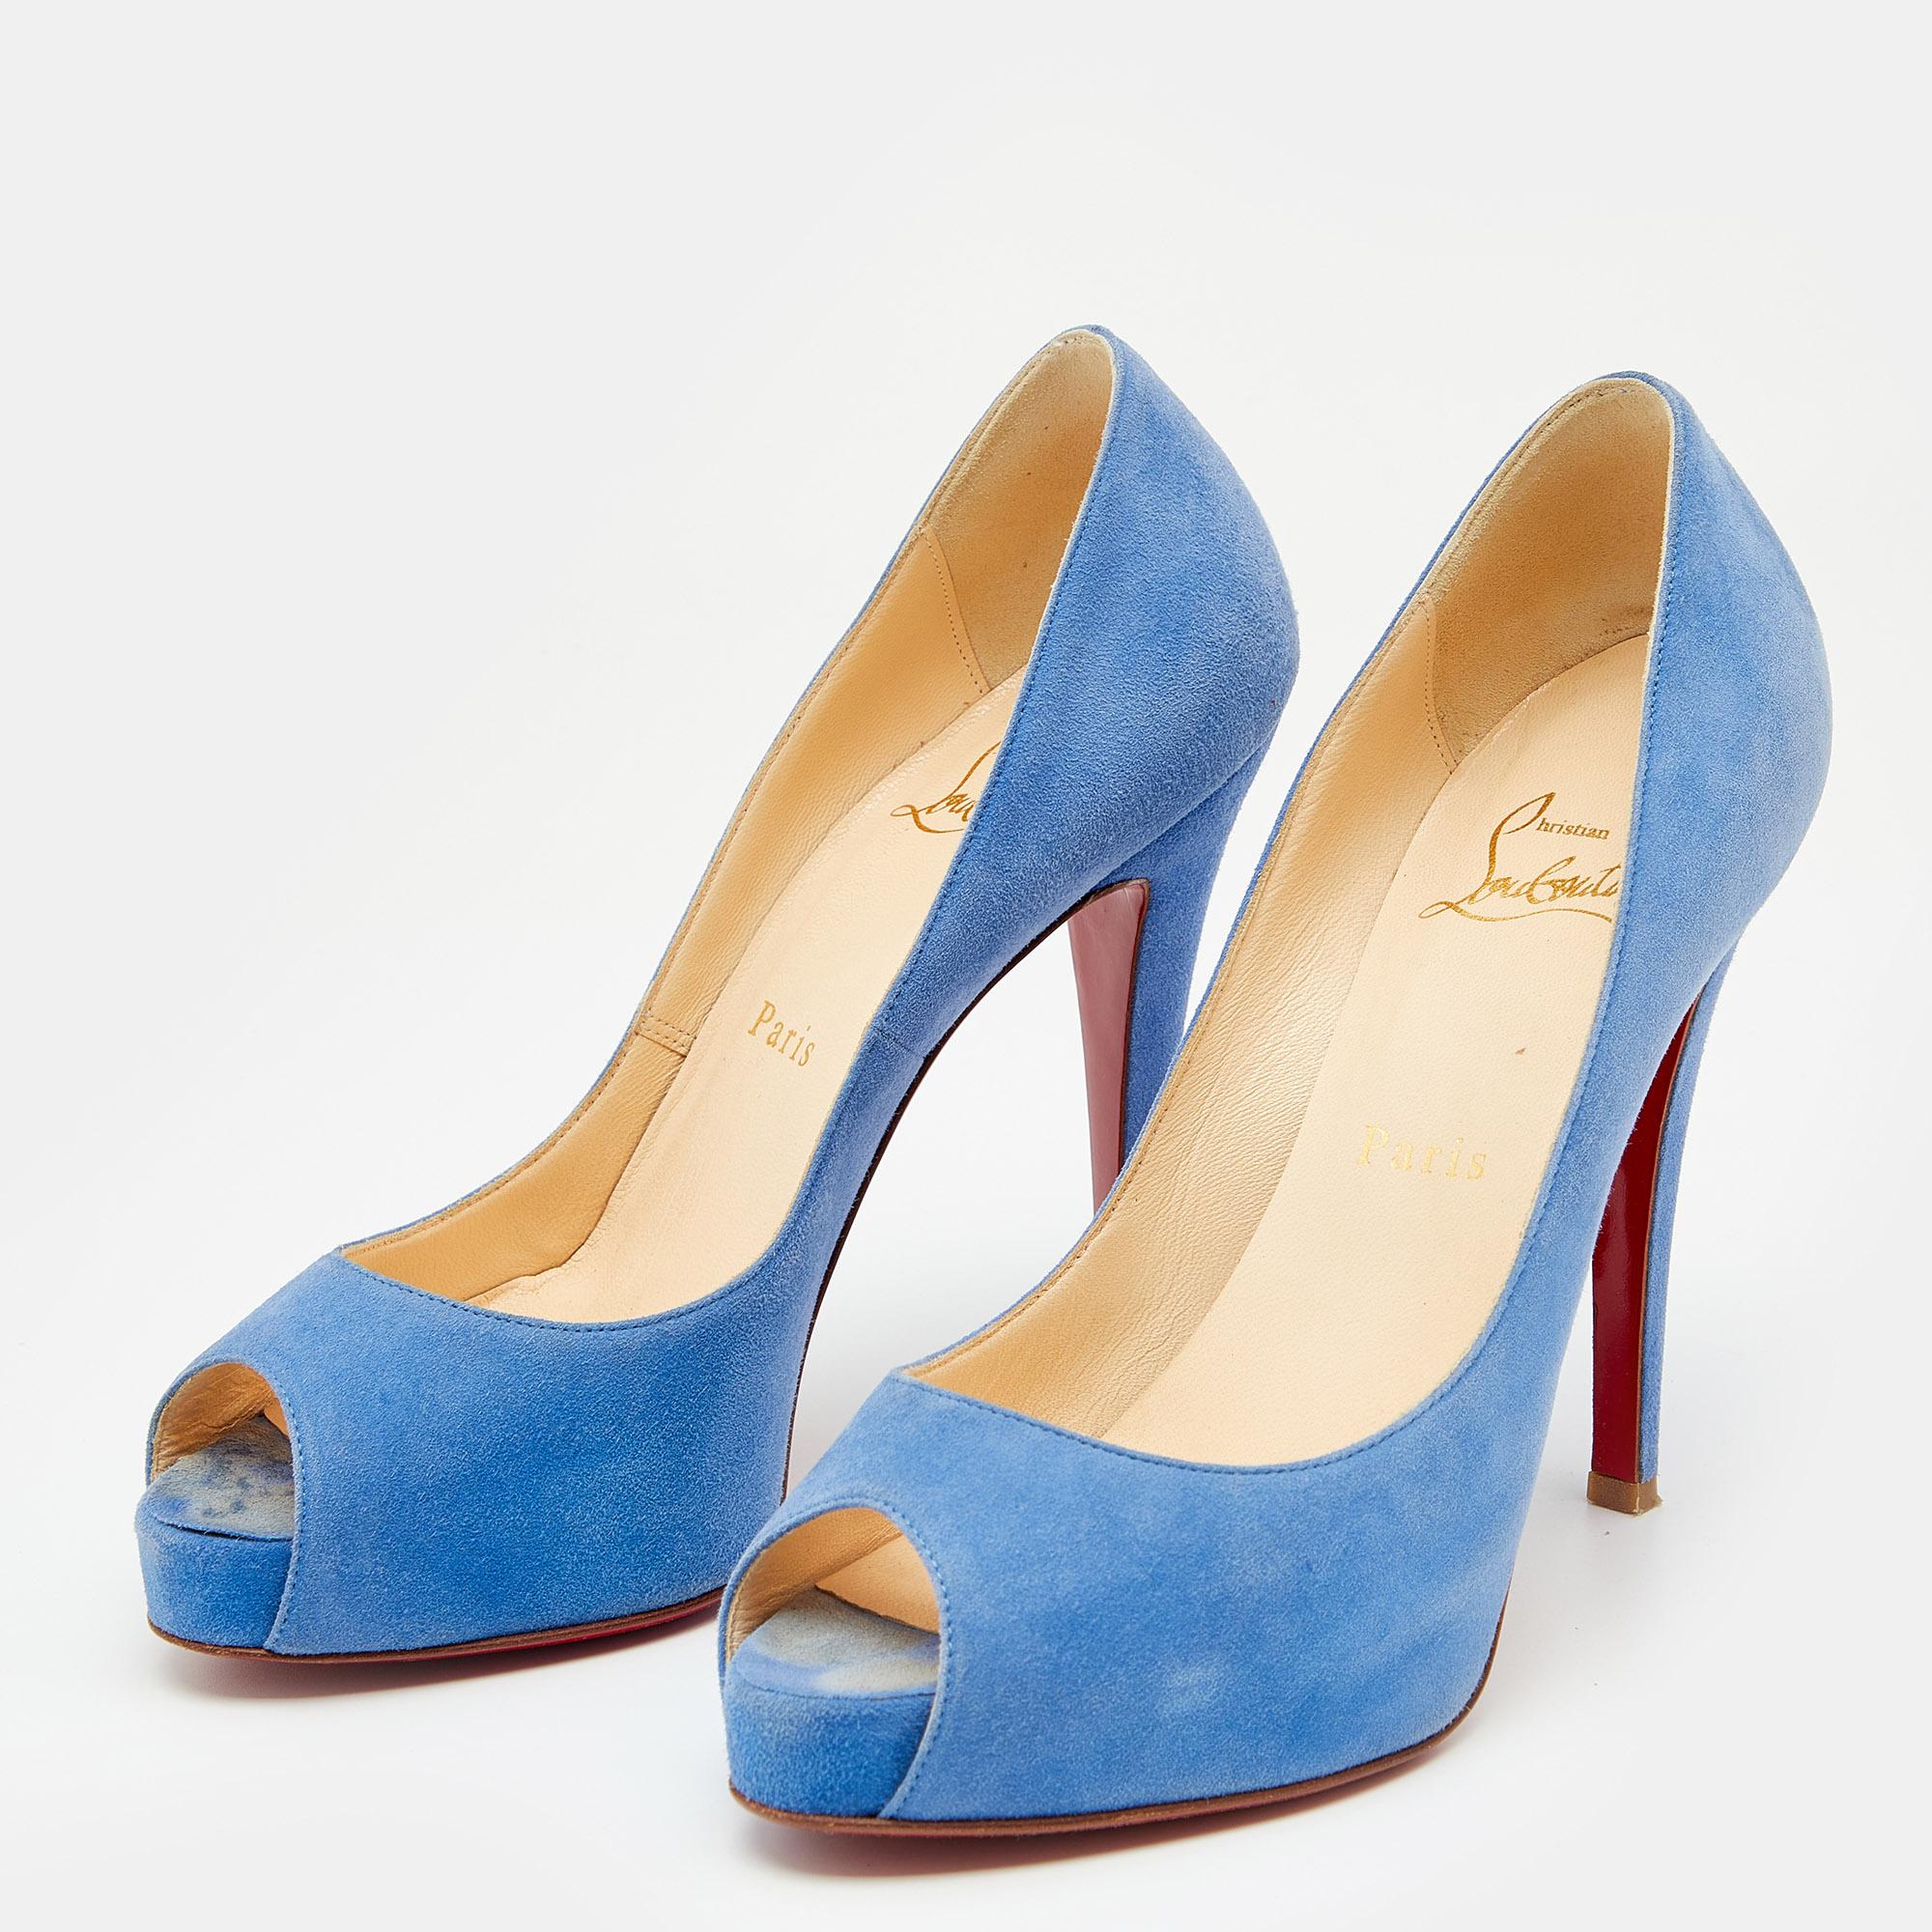 Women's Christian Louboutin Blue Suede New Very Prive Peep Toe Pumps Size 36.5